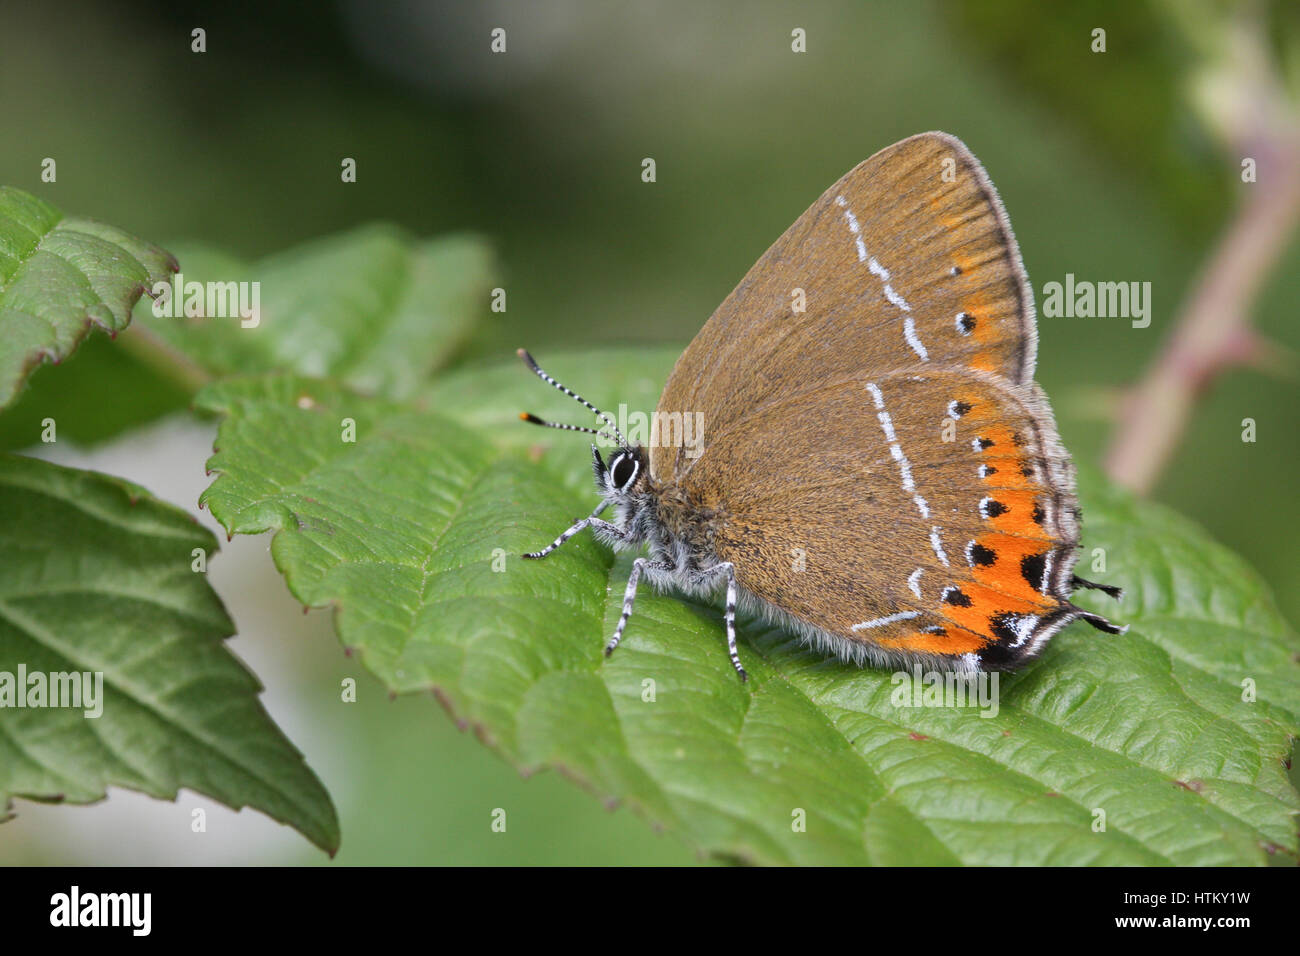 A side view of a Black Hairstreak Butterfly (Satyrium pruni) perched on a leaf with its wings closed. Stock Photo